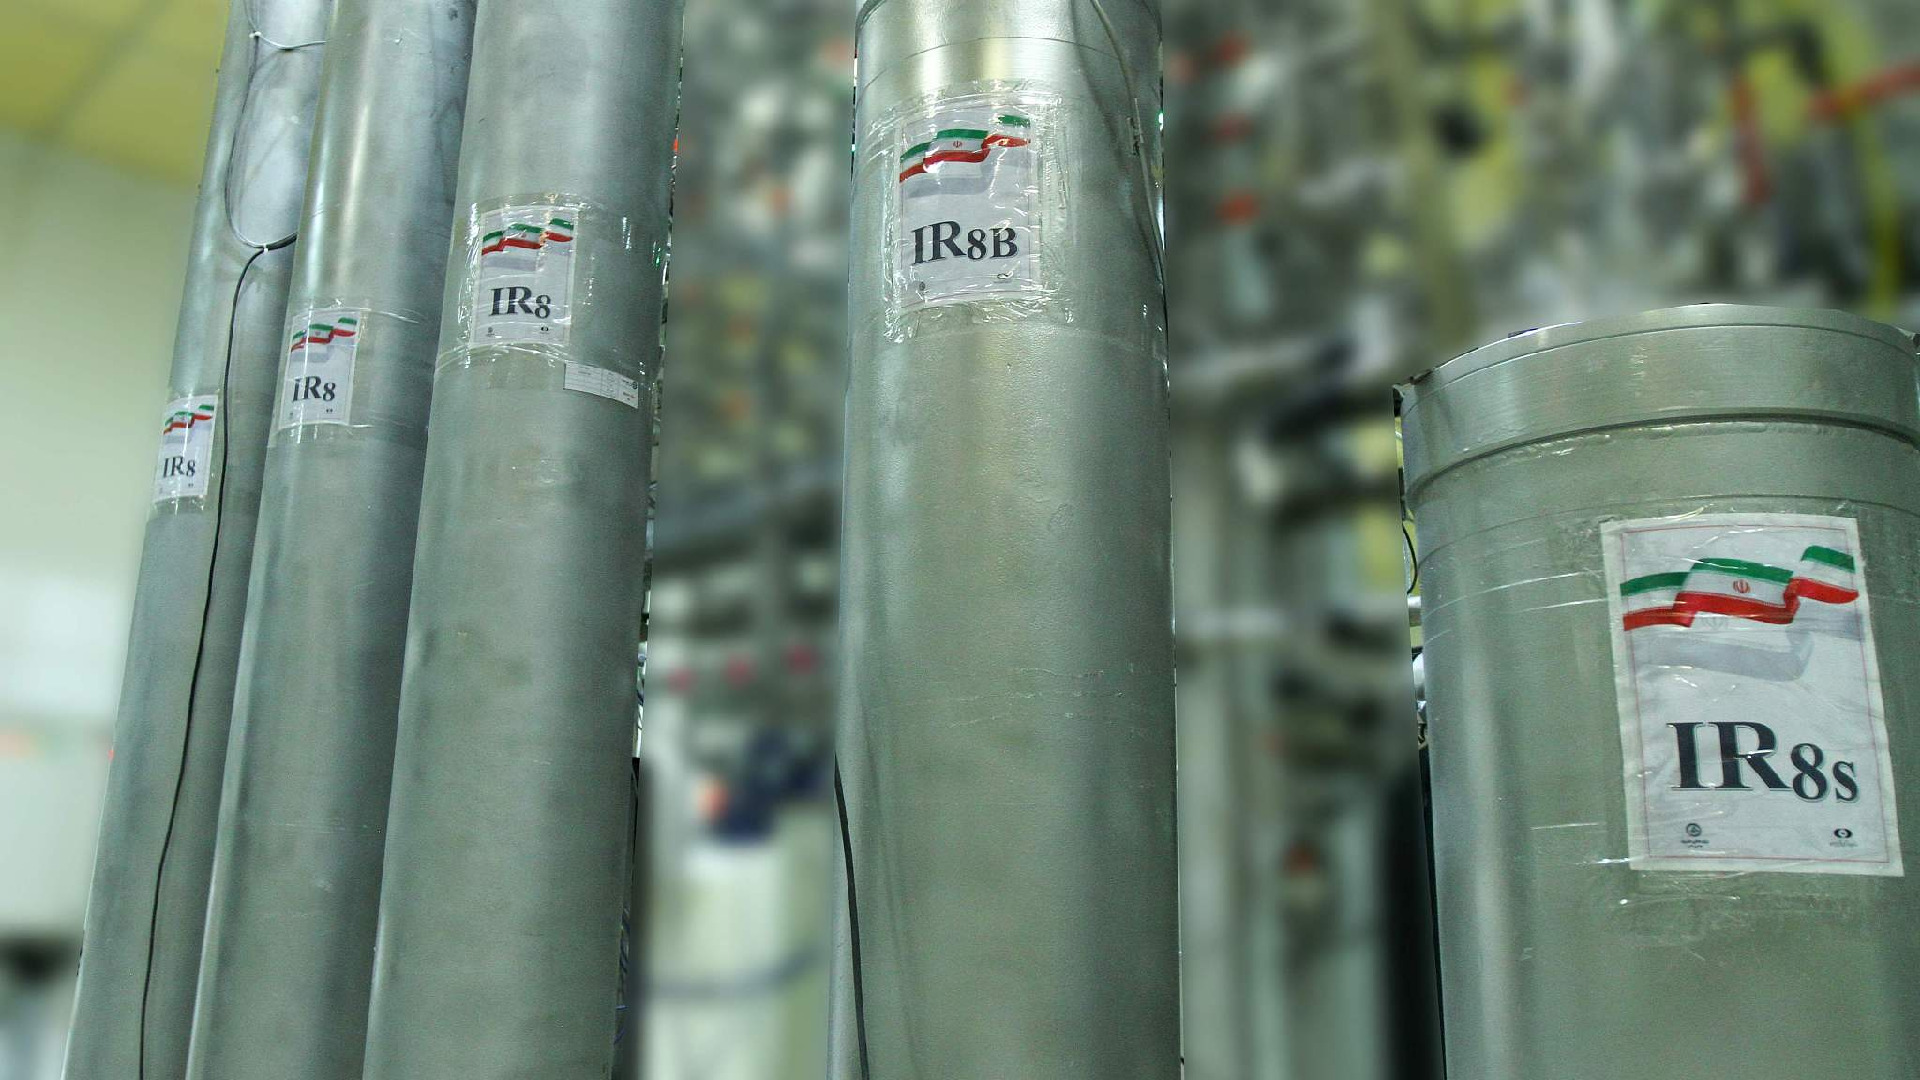 Iran Says It Will Soon Produce Enriched Uranium Metal